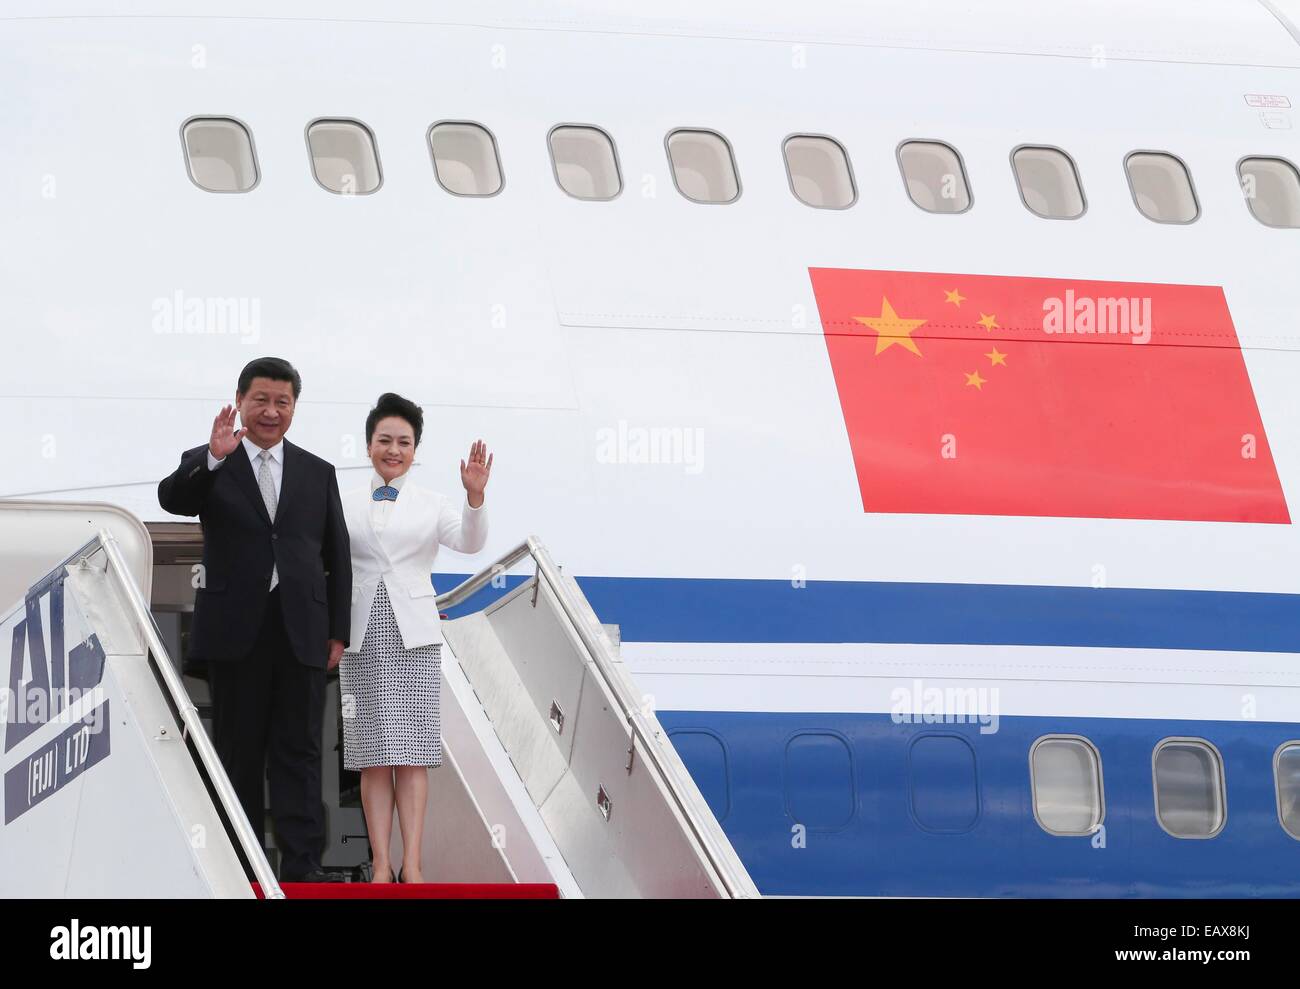 Nadi, Fiji. 21st Nov, 2014. Chinese President Xi Jinping (L) and his wife Peng Liyuan step out of the plane upon their arrival at the airport in Nadi, Fiji, Nov. 21, 2014. Xi is paying a state visit to Fiji, the first in history by a Chinese president. © Ding Lin/Xinhua/Alamy Live News Stock Photo